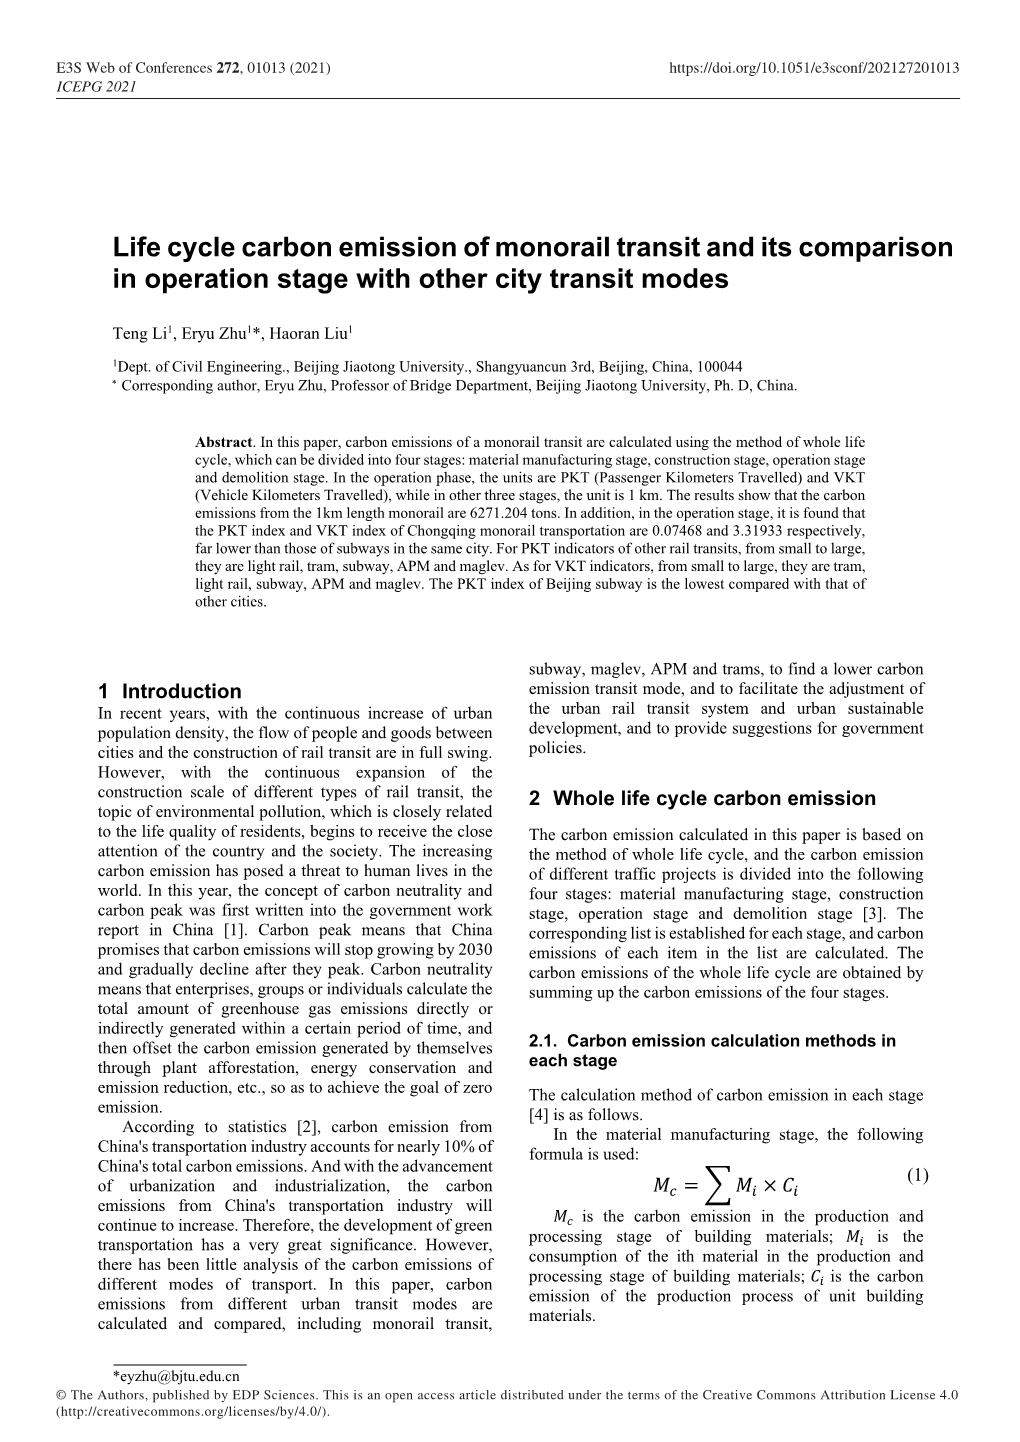 Life Cycle Carbon Emission of Monorail Transit and Its Comparison in Operation Stage with Other City Transit Modes